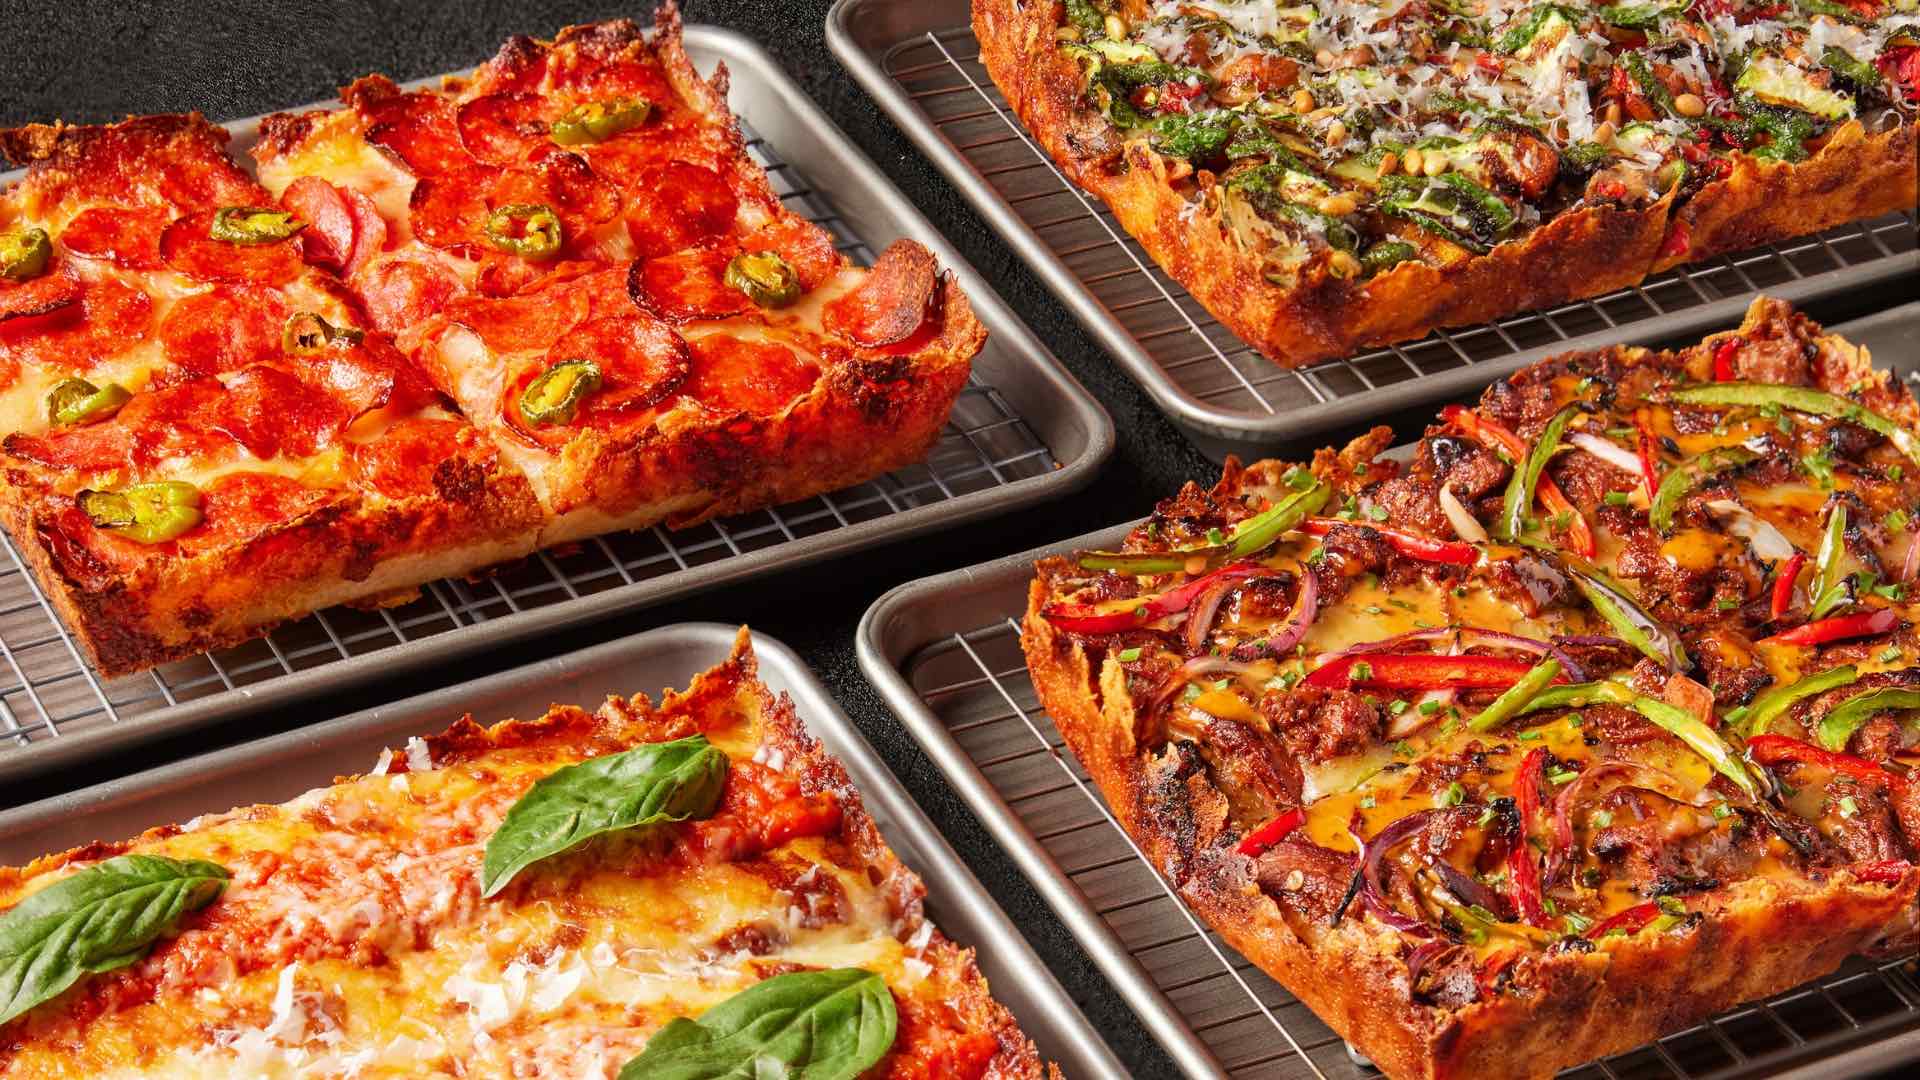 Bondi Pizza Is Introducing a Limited-Time Deep Dish Style Range, and We Have an Exclusive Discount